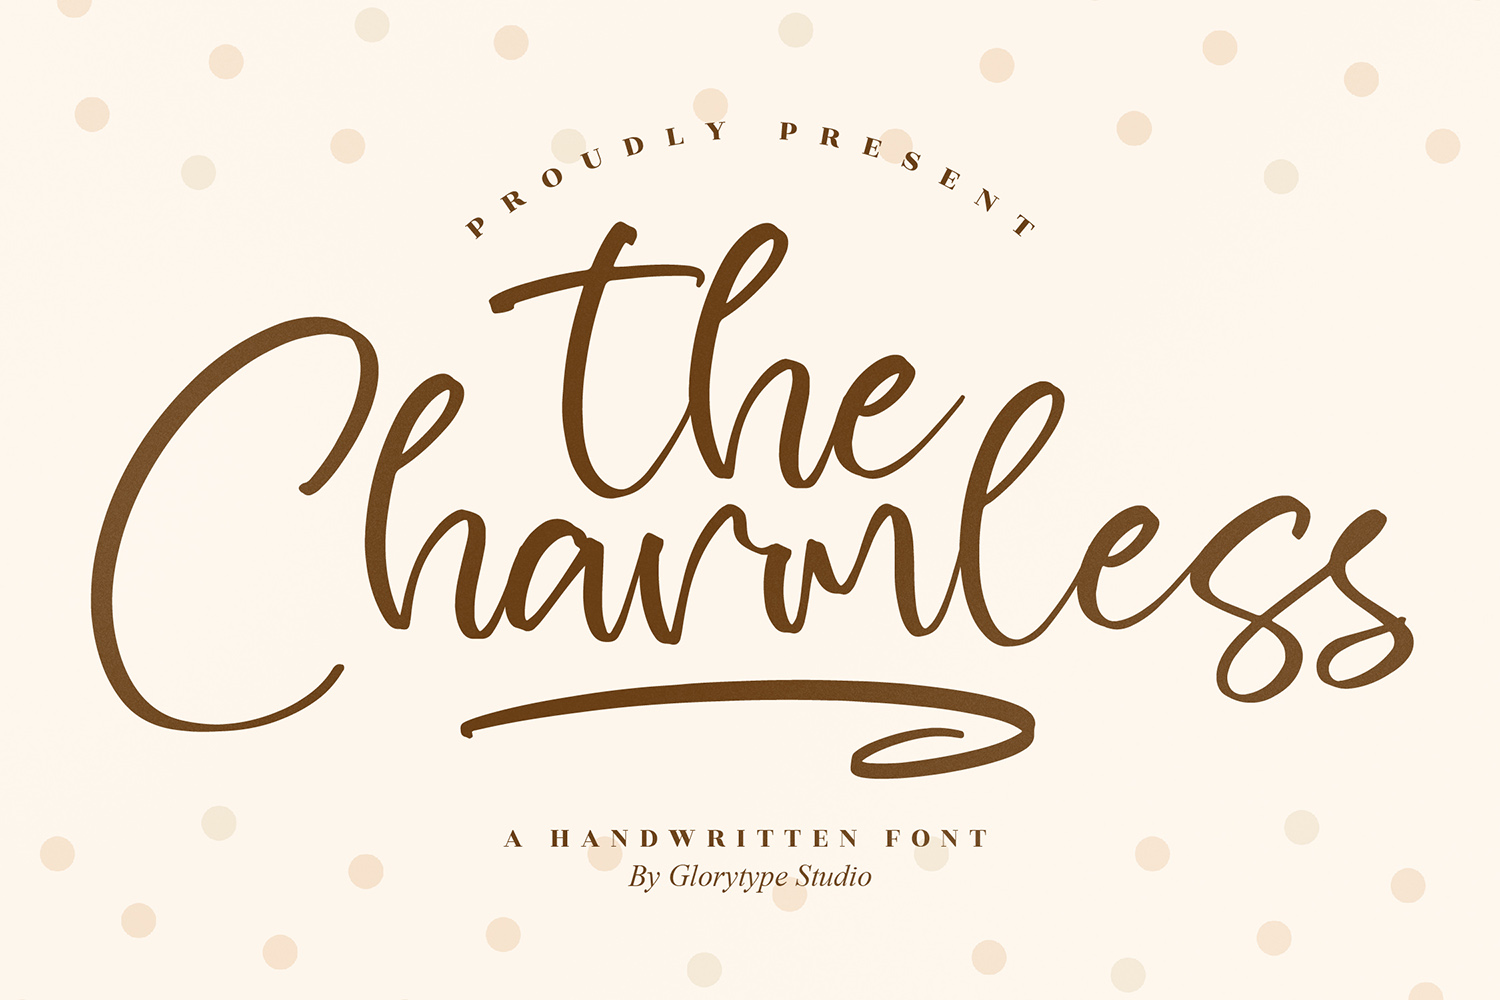 The Charmless Free Font